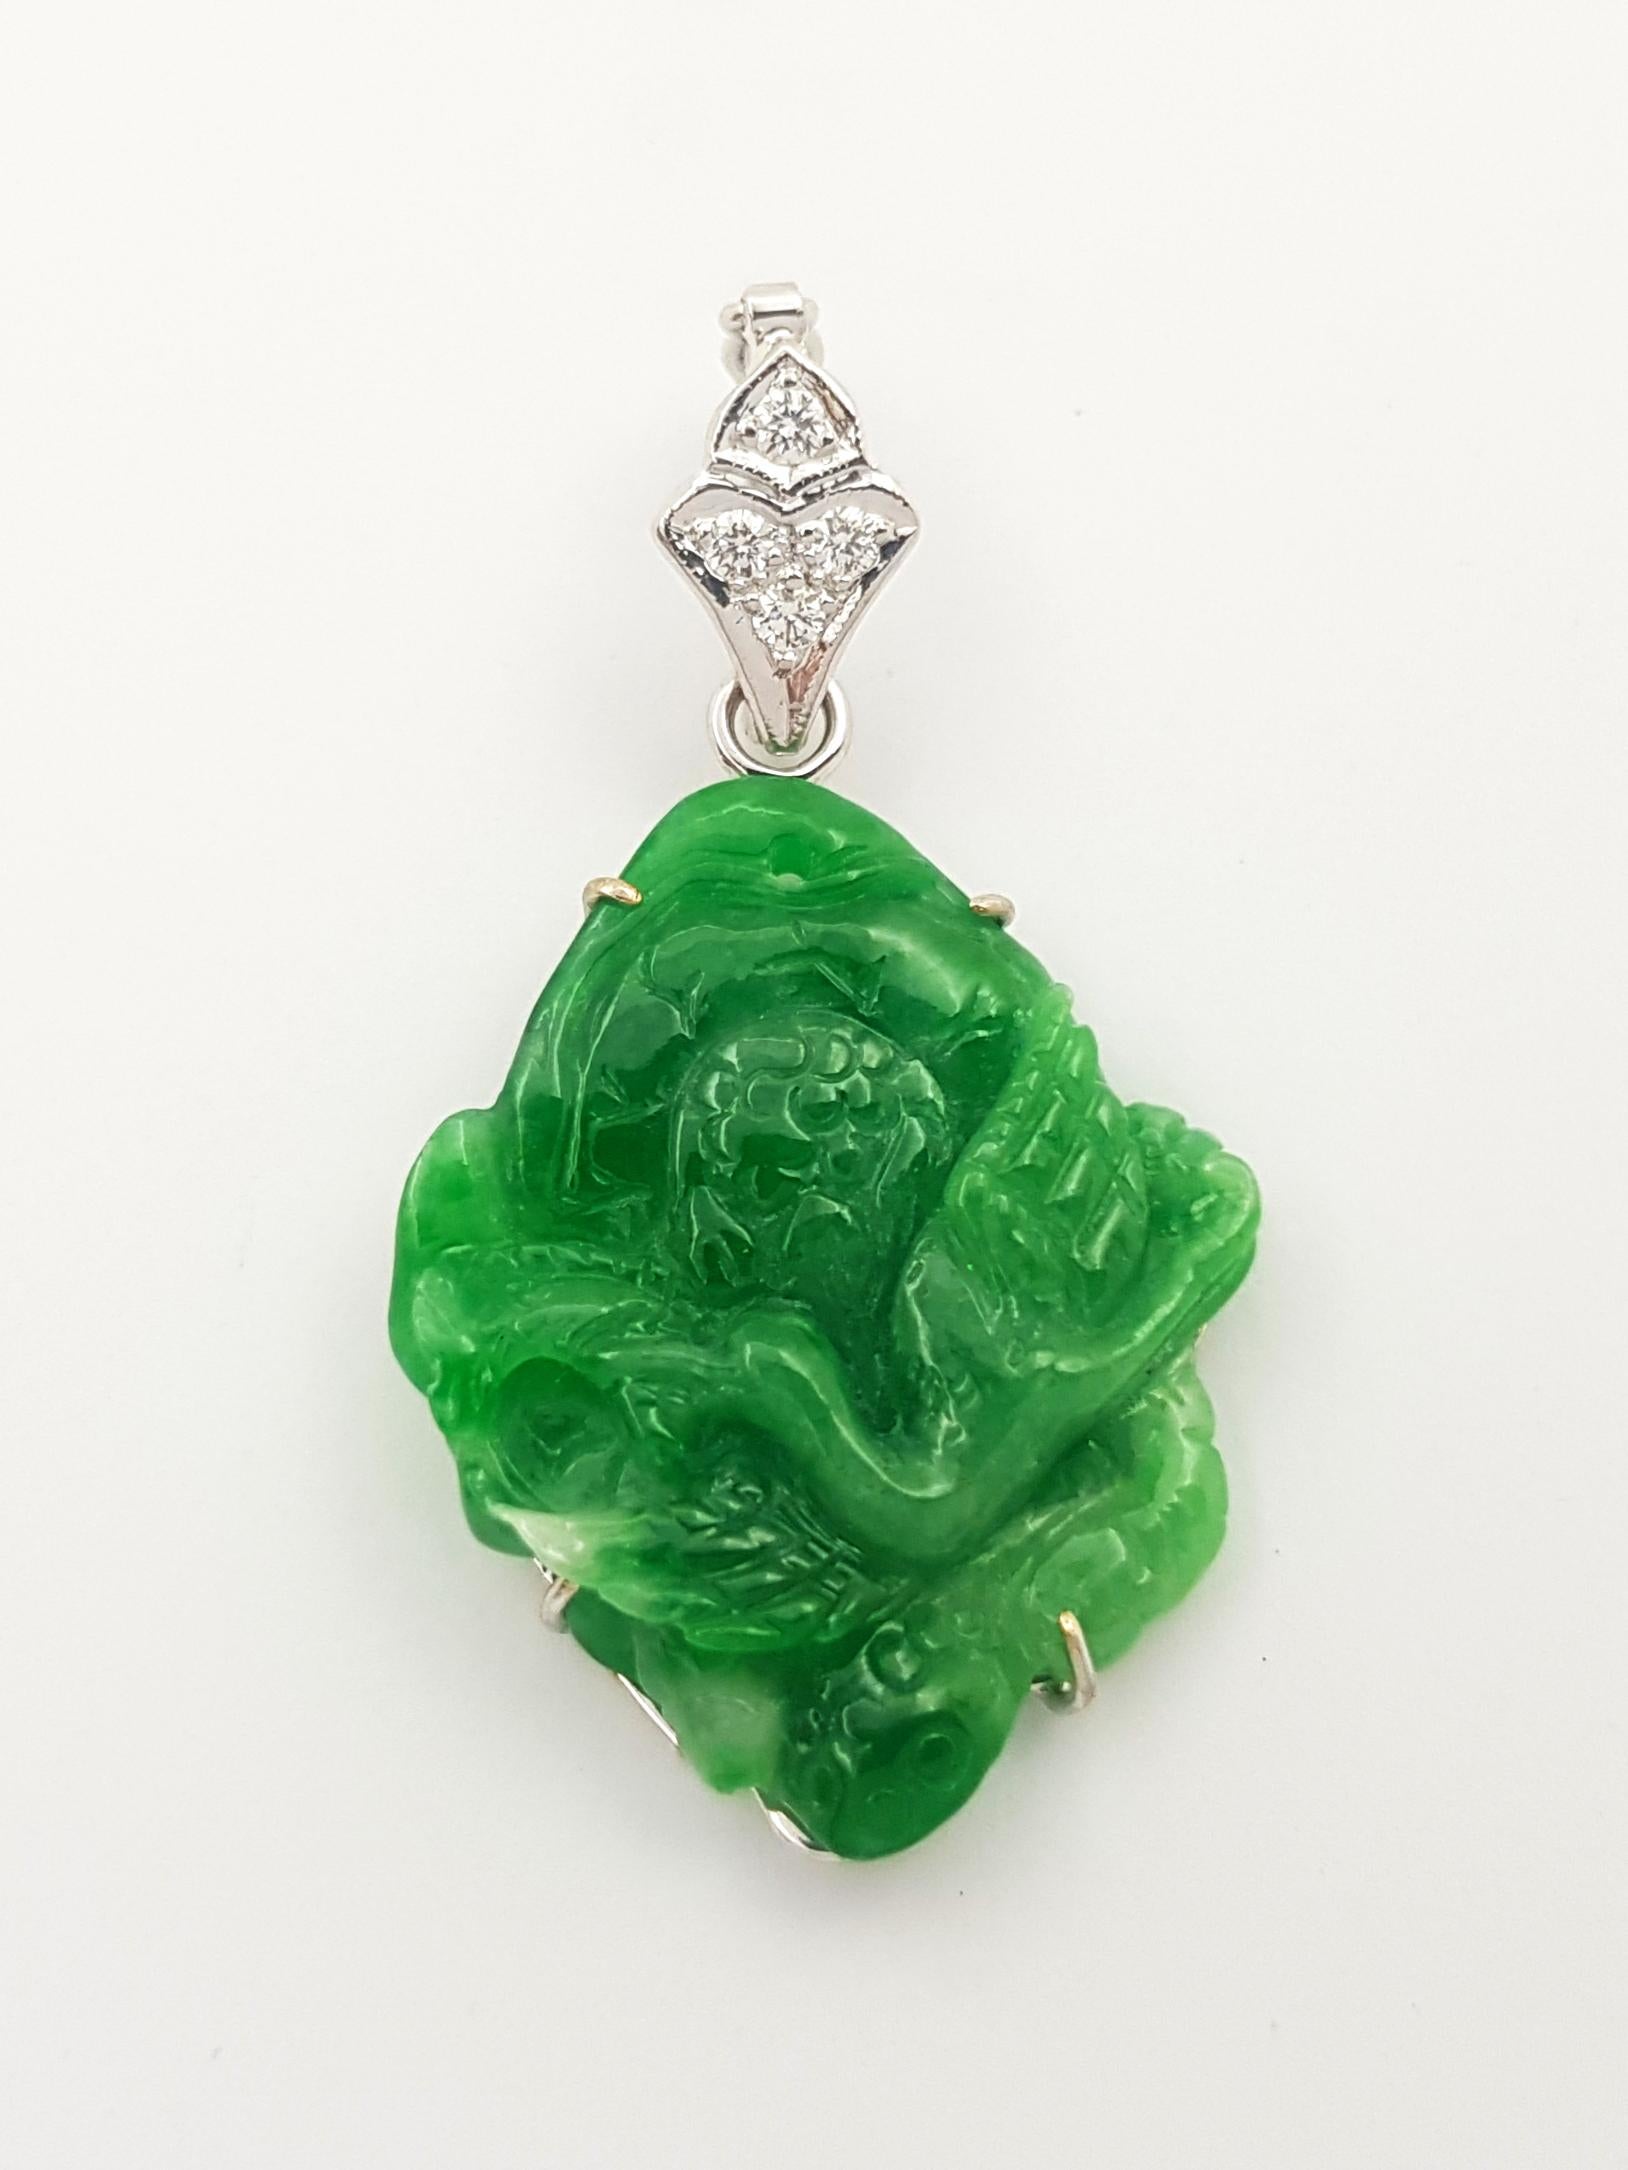 Jade 21.71 carats with Diamond 0.10 carat Pendant set in 18K White Gold Settings
(chain not included)

Width: 2.3 cm 
Length: 4.4  cm
Total Weight: 6.53 grams

